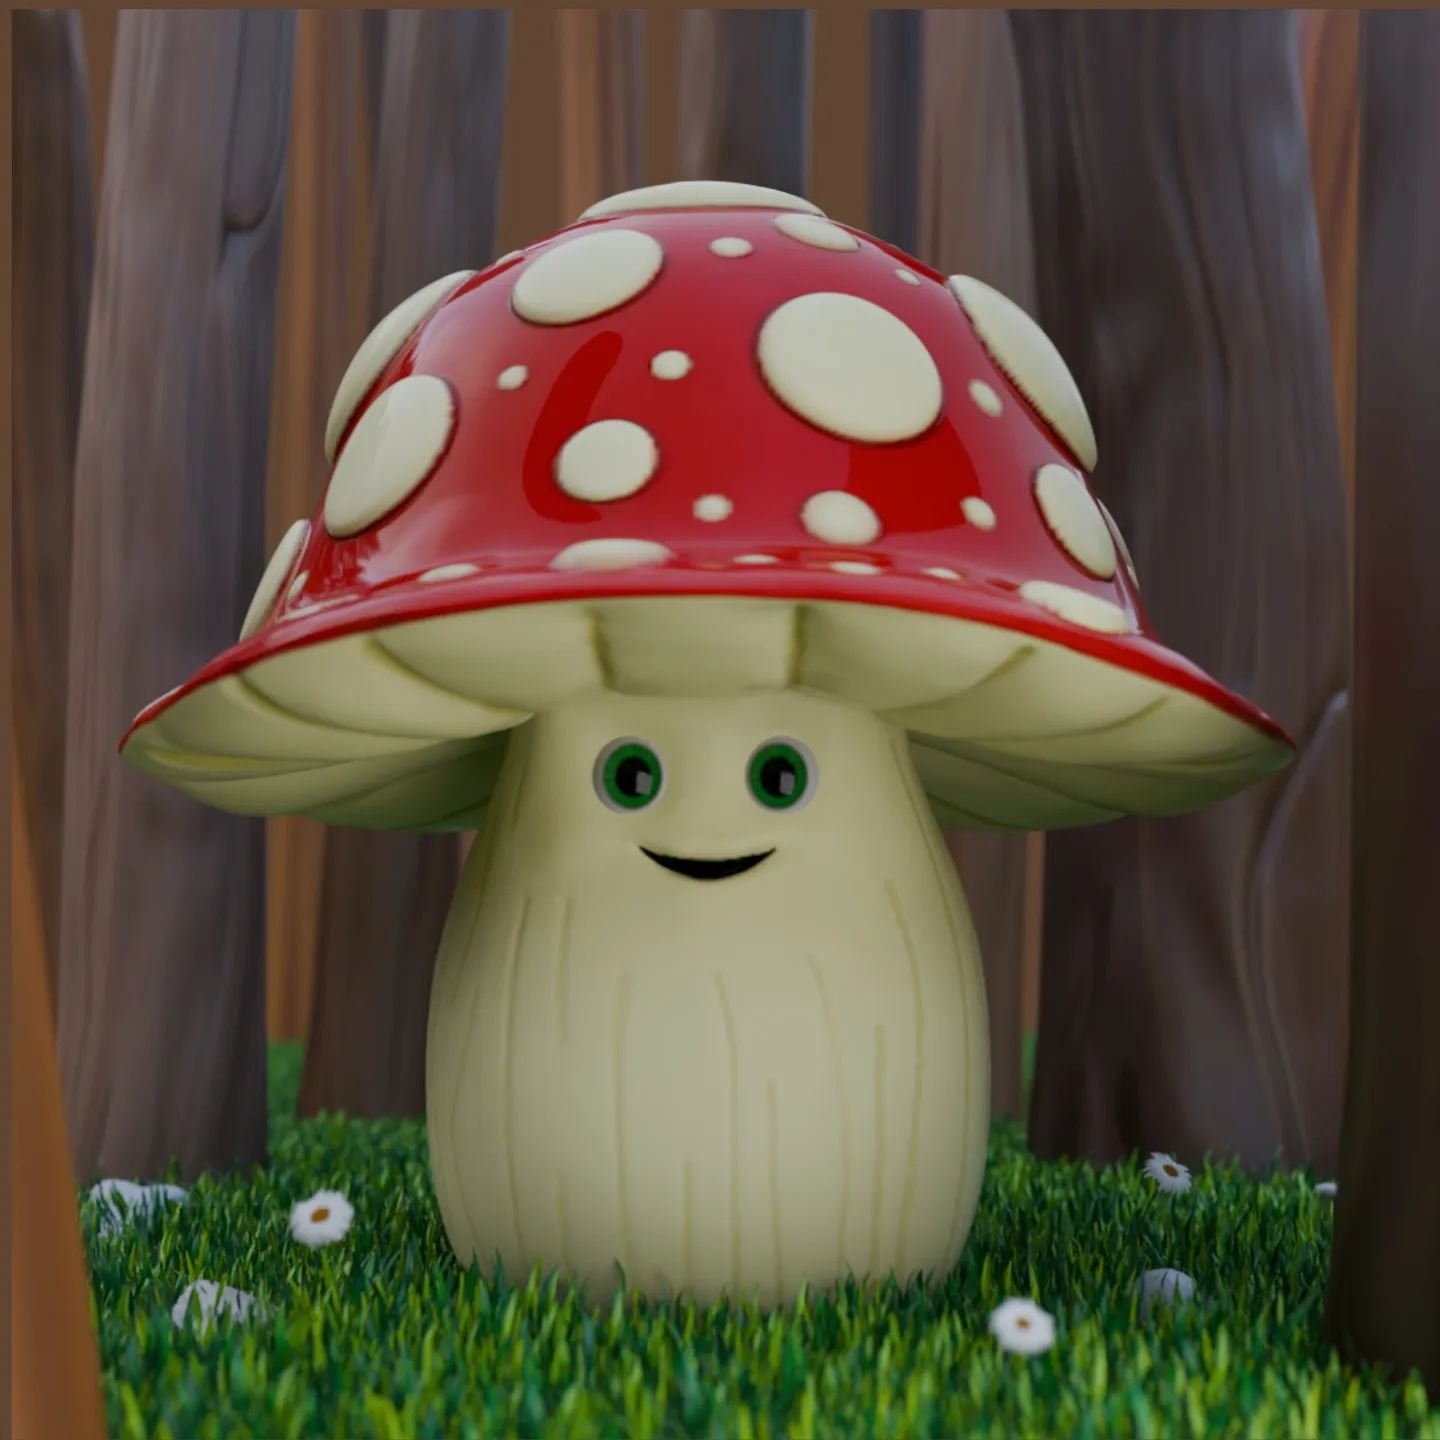 Finished this fun guy a while ago but forgot to post it 🍄

#characterdesign #3dcharacter #fungi #mushroomart #townsvillesmallbusiness #townsvillebusiness #townsvillelocalbusiness